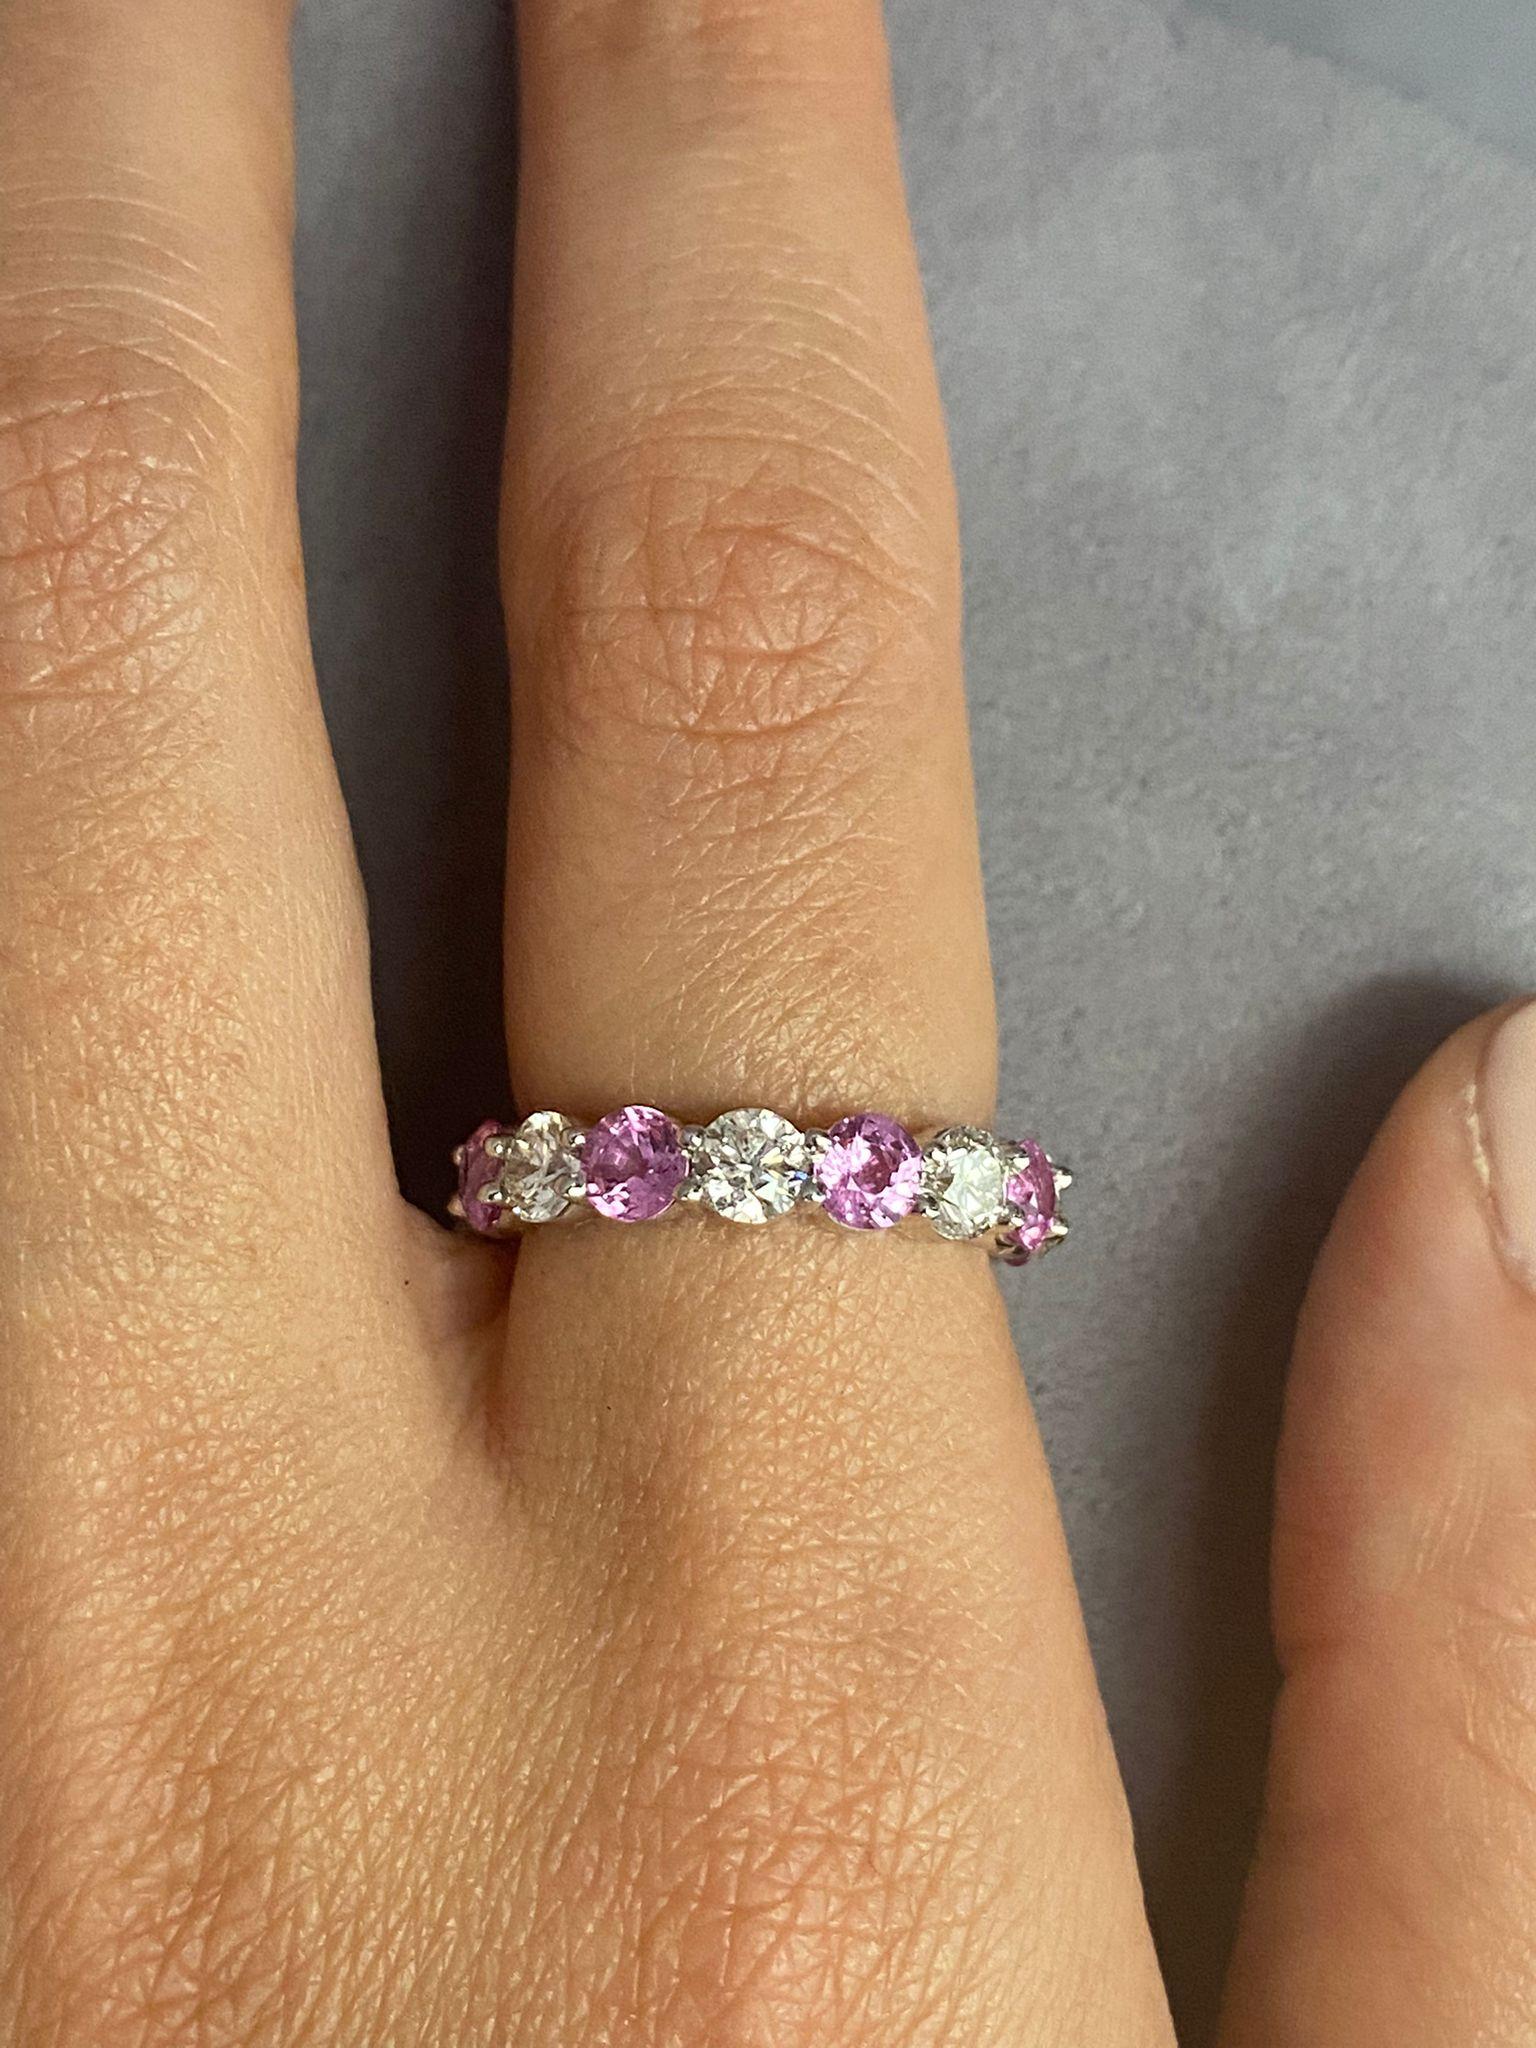 8 Pink Sapphires weighing 2.55 Carats
8 Round Diamonds weighing 1.94 Carats.
Set in Platinum.
Size 6.

Also available in Blue Sapphire, Emeralds and Rubies. Can be ordered in any size.